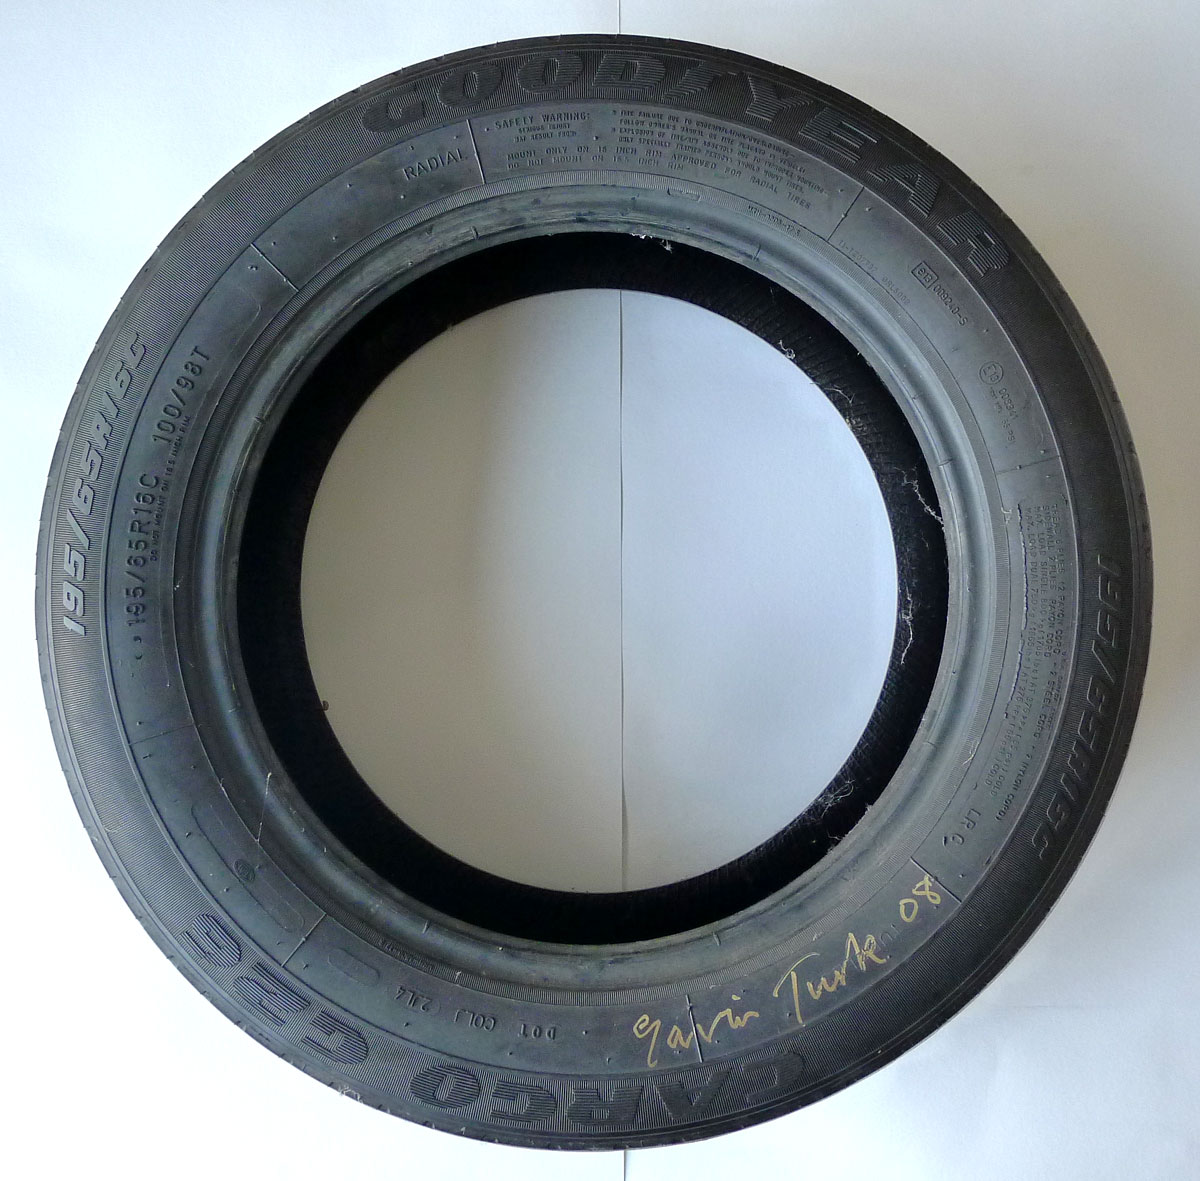 GAVIN TURK [b.1967]. Wheel Tyre, 2008. Used car tyre, signed and dated '08 in gold ink, from the